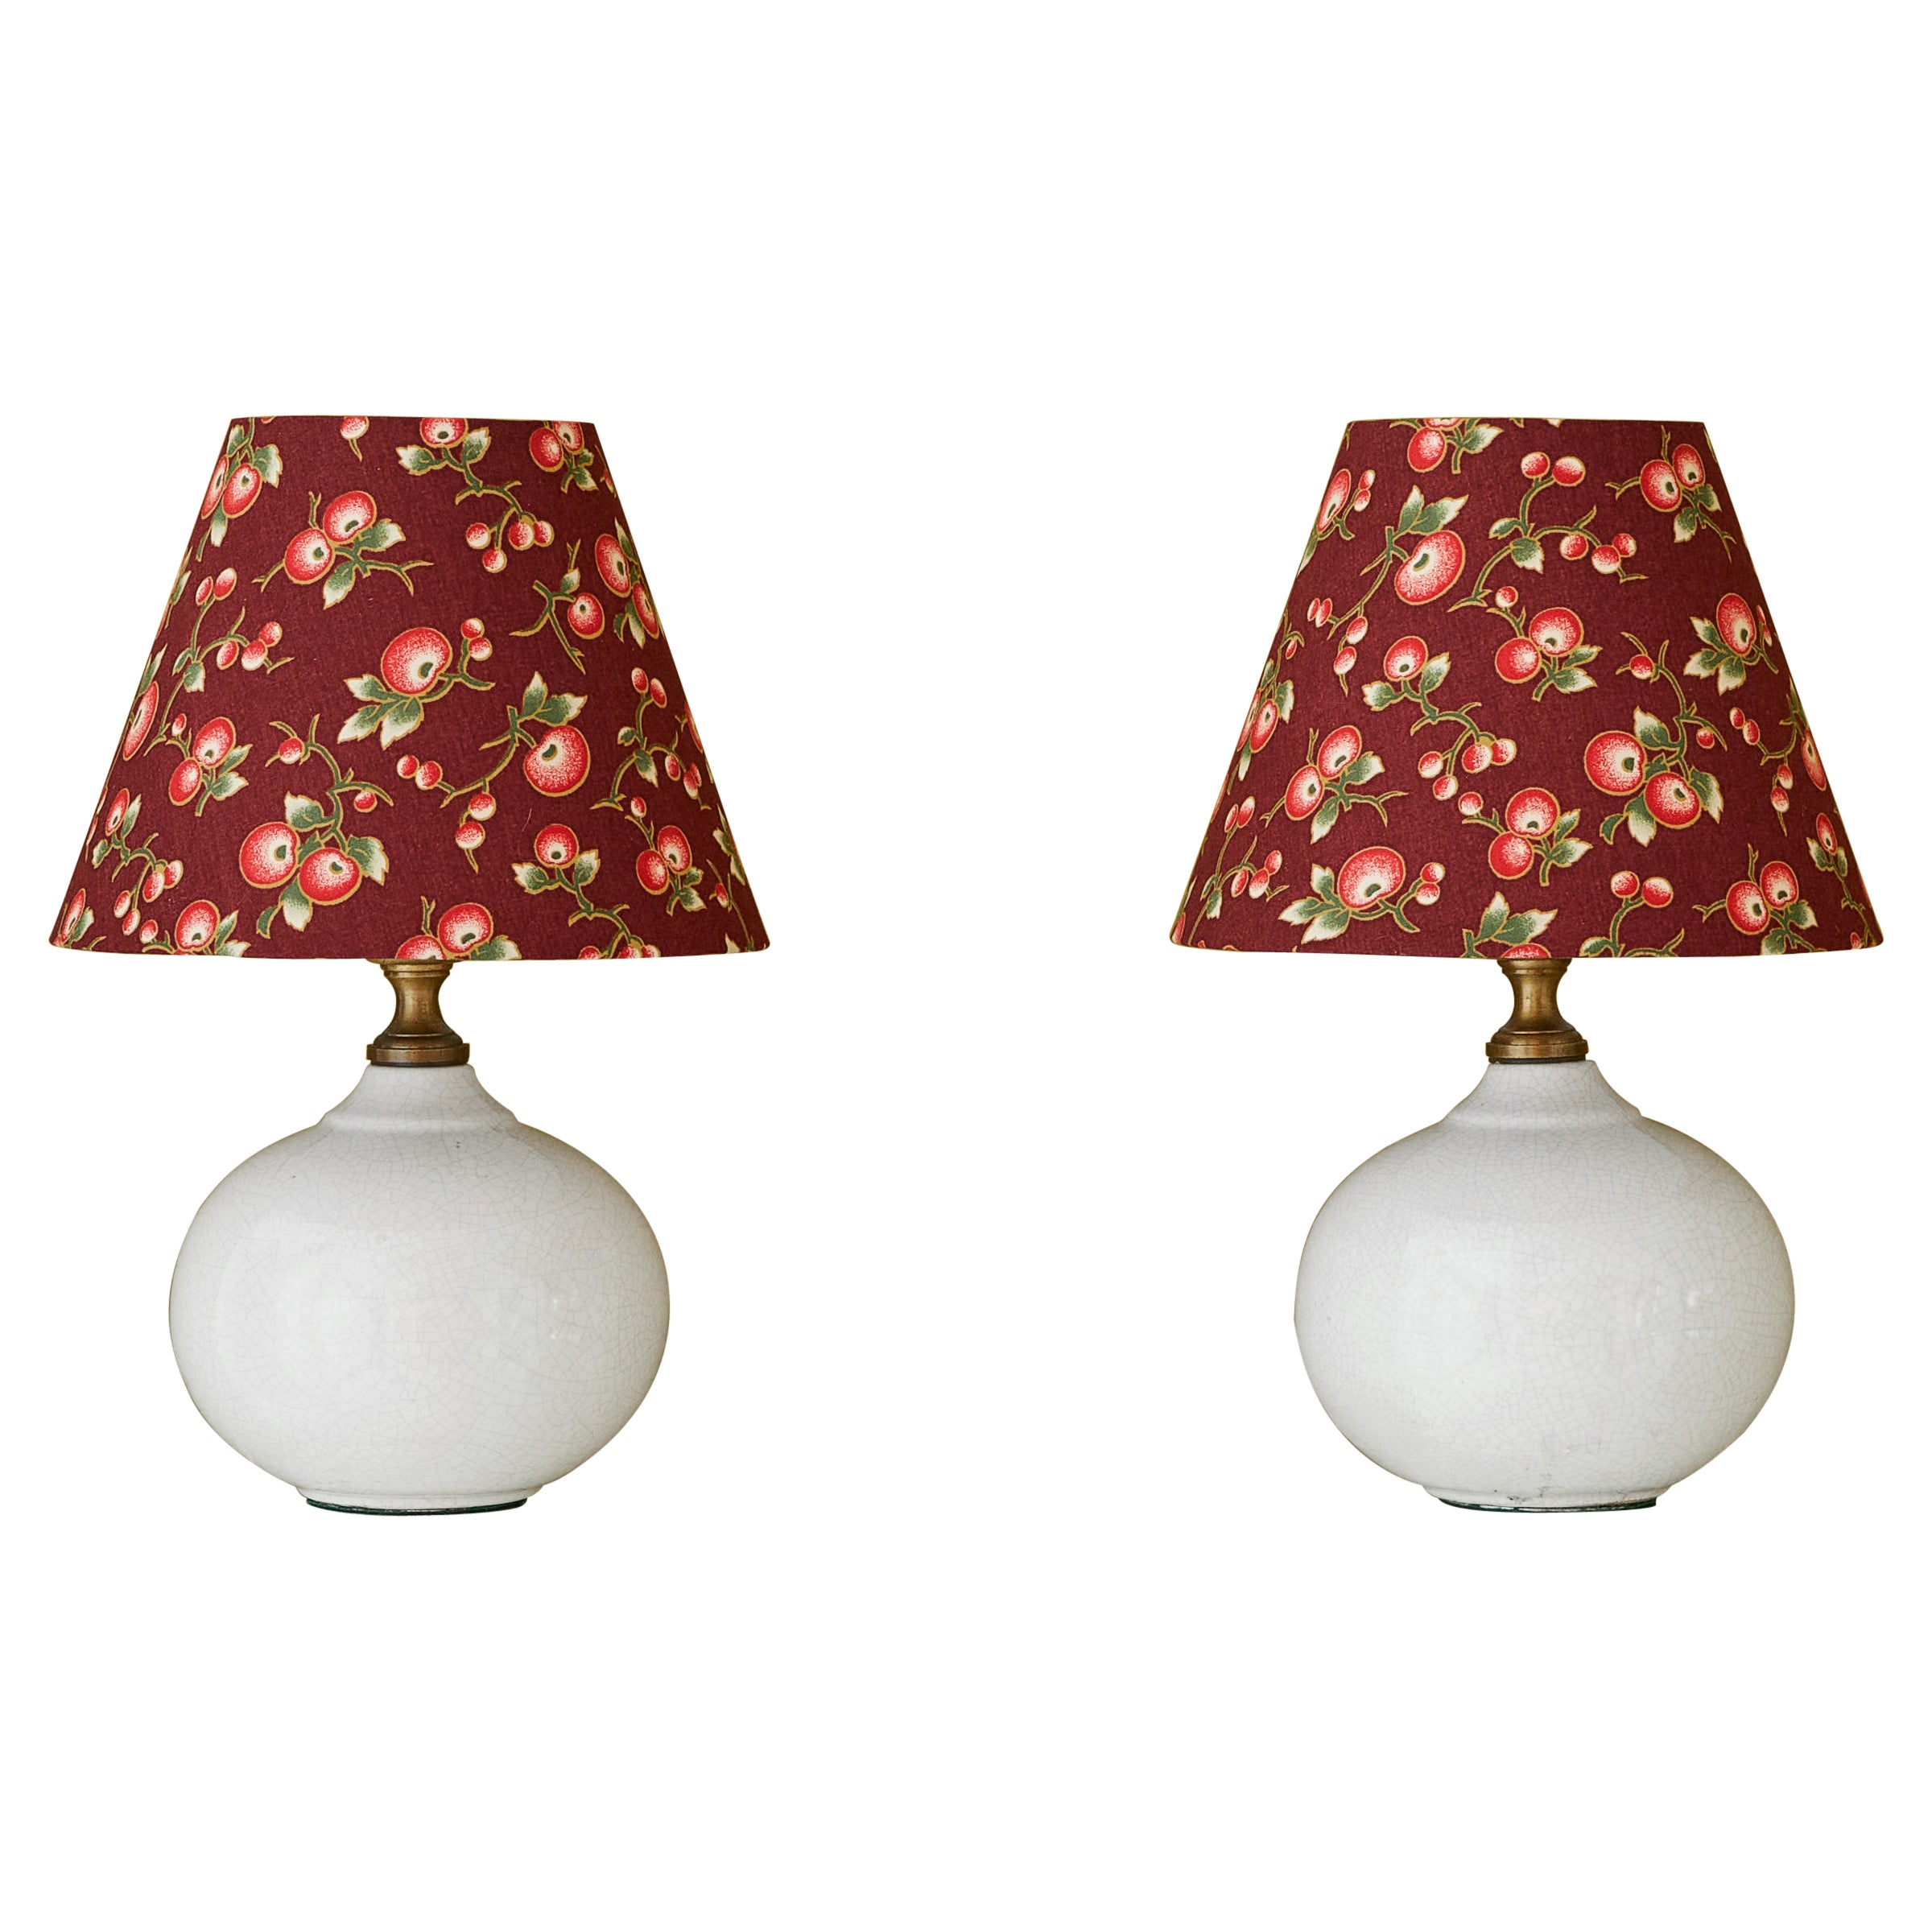 Vintage Pair of Ceramic Table Lamps with Customized Shades, France 20th Century For Sale